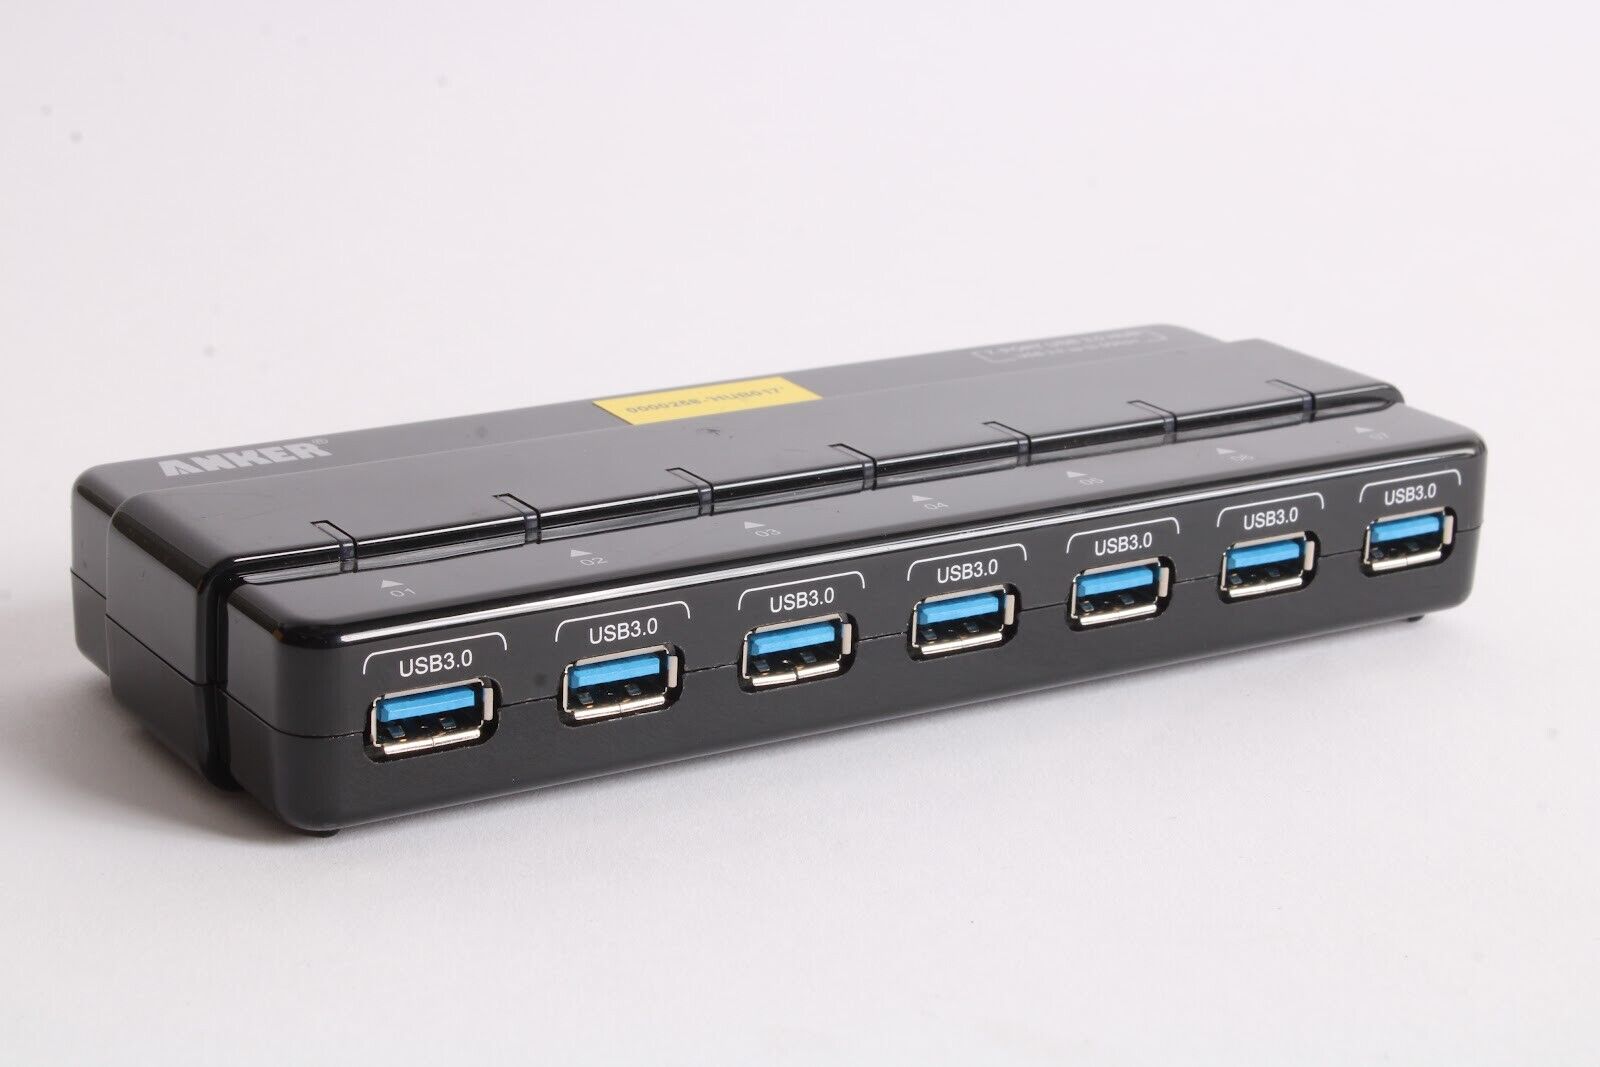 Anker H7928-U3 7 Port USB 3.0 HUB USB 3.0 up to 50GBps - No Power Adapter